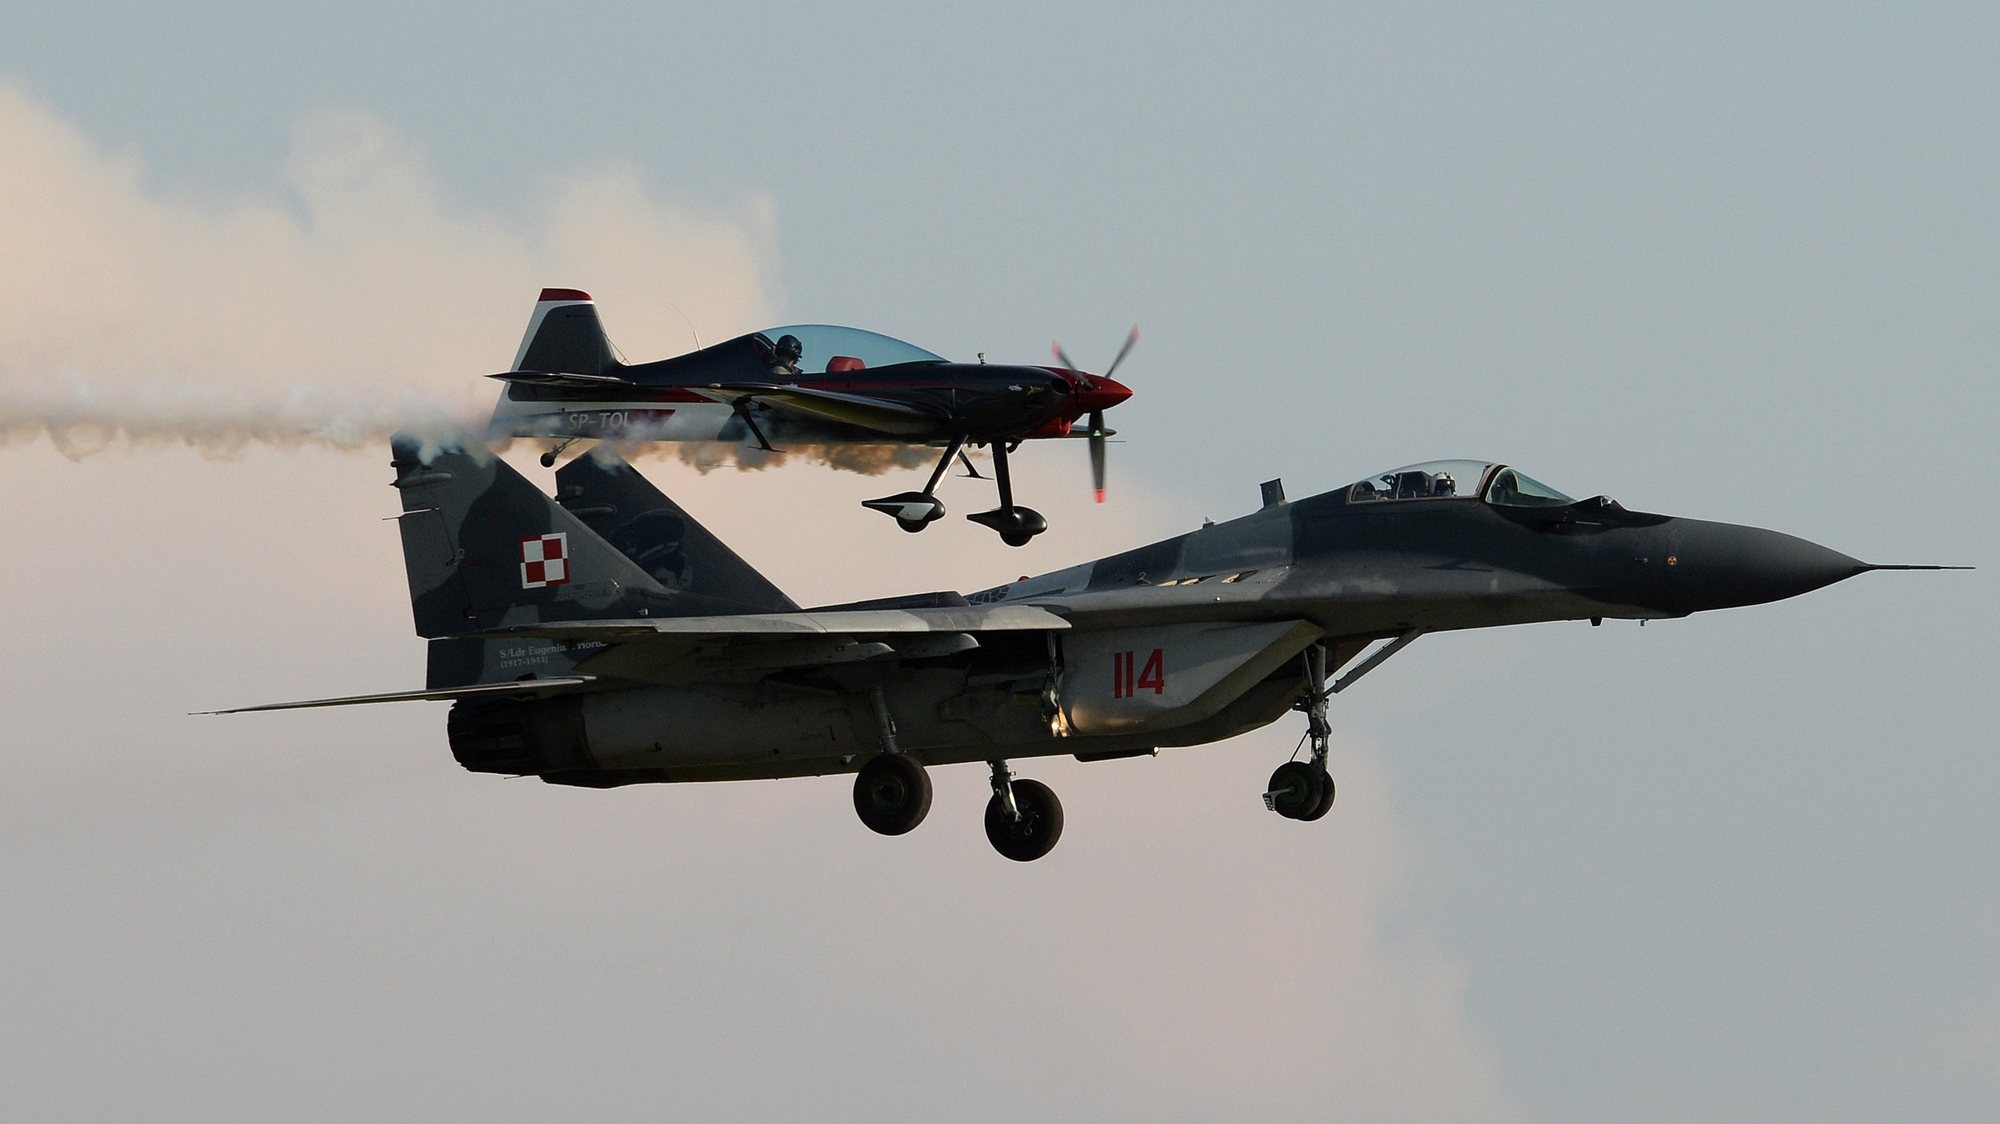 epa06167311 Polish Air Force Mig-29 fighter and &#039;XA-41&#039; performs during the annual air show in the second and final day of the Radom International Airshow at Radom&#039;s Sadkow Airport in Radom, Poland, 27 August 2017. The biggest aviation event in Poland presents more than 200 aircraft from 10 countries.  EPA/Jacek Turczyk POLAND OUT